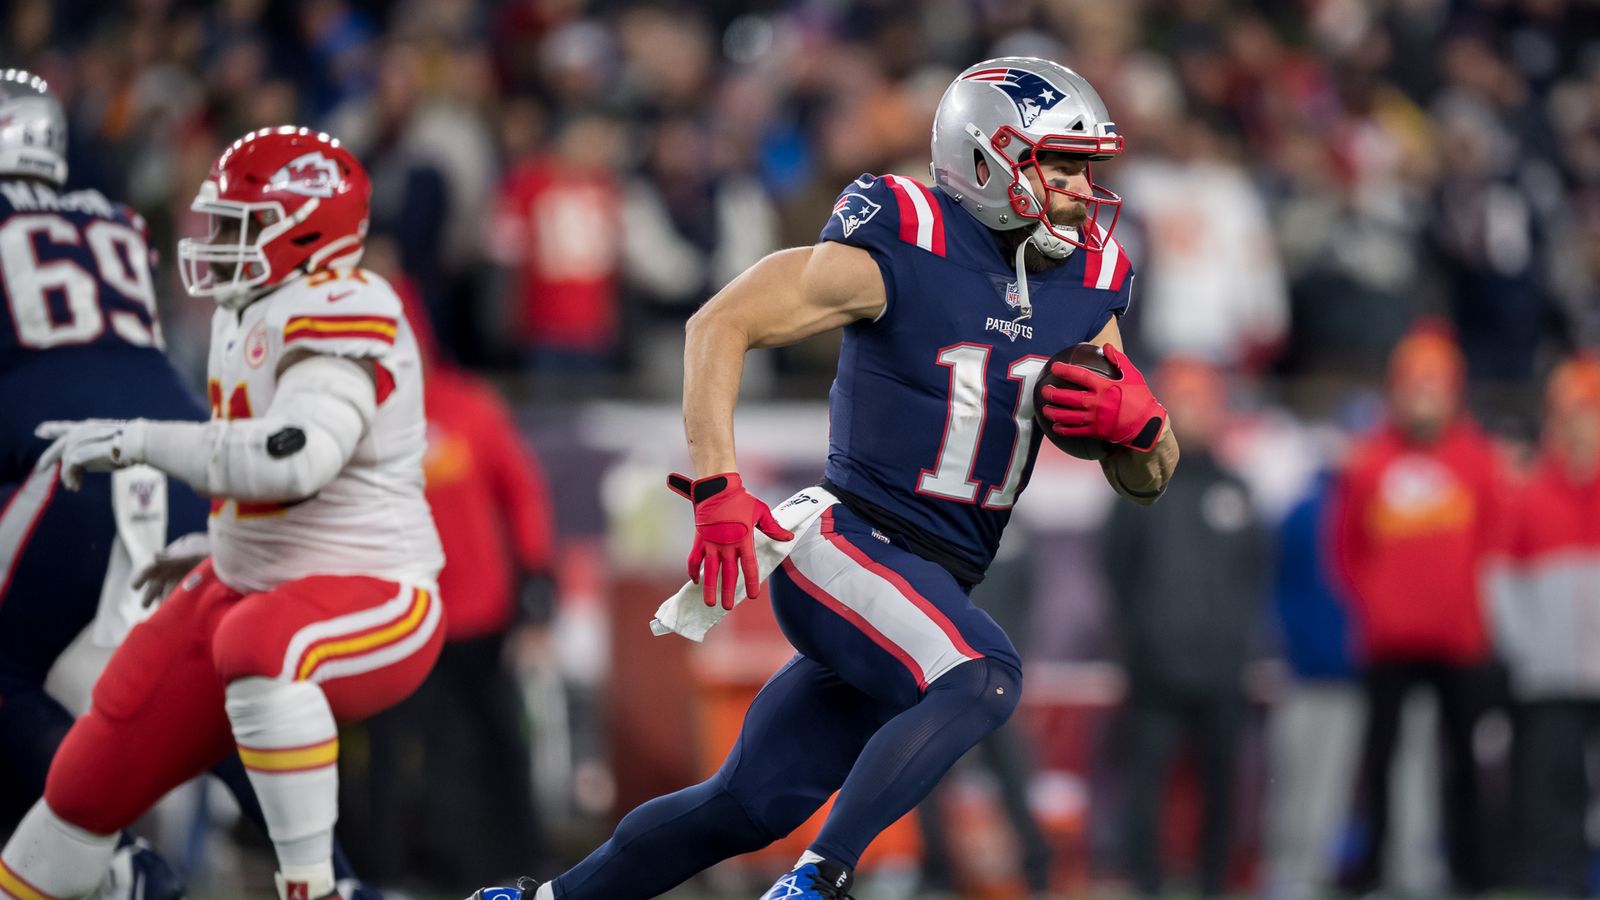 Dr. Flynn: Julian Edelman is reportedly dealing with a knee issue